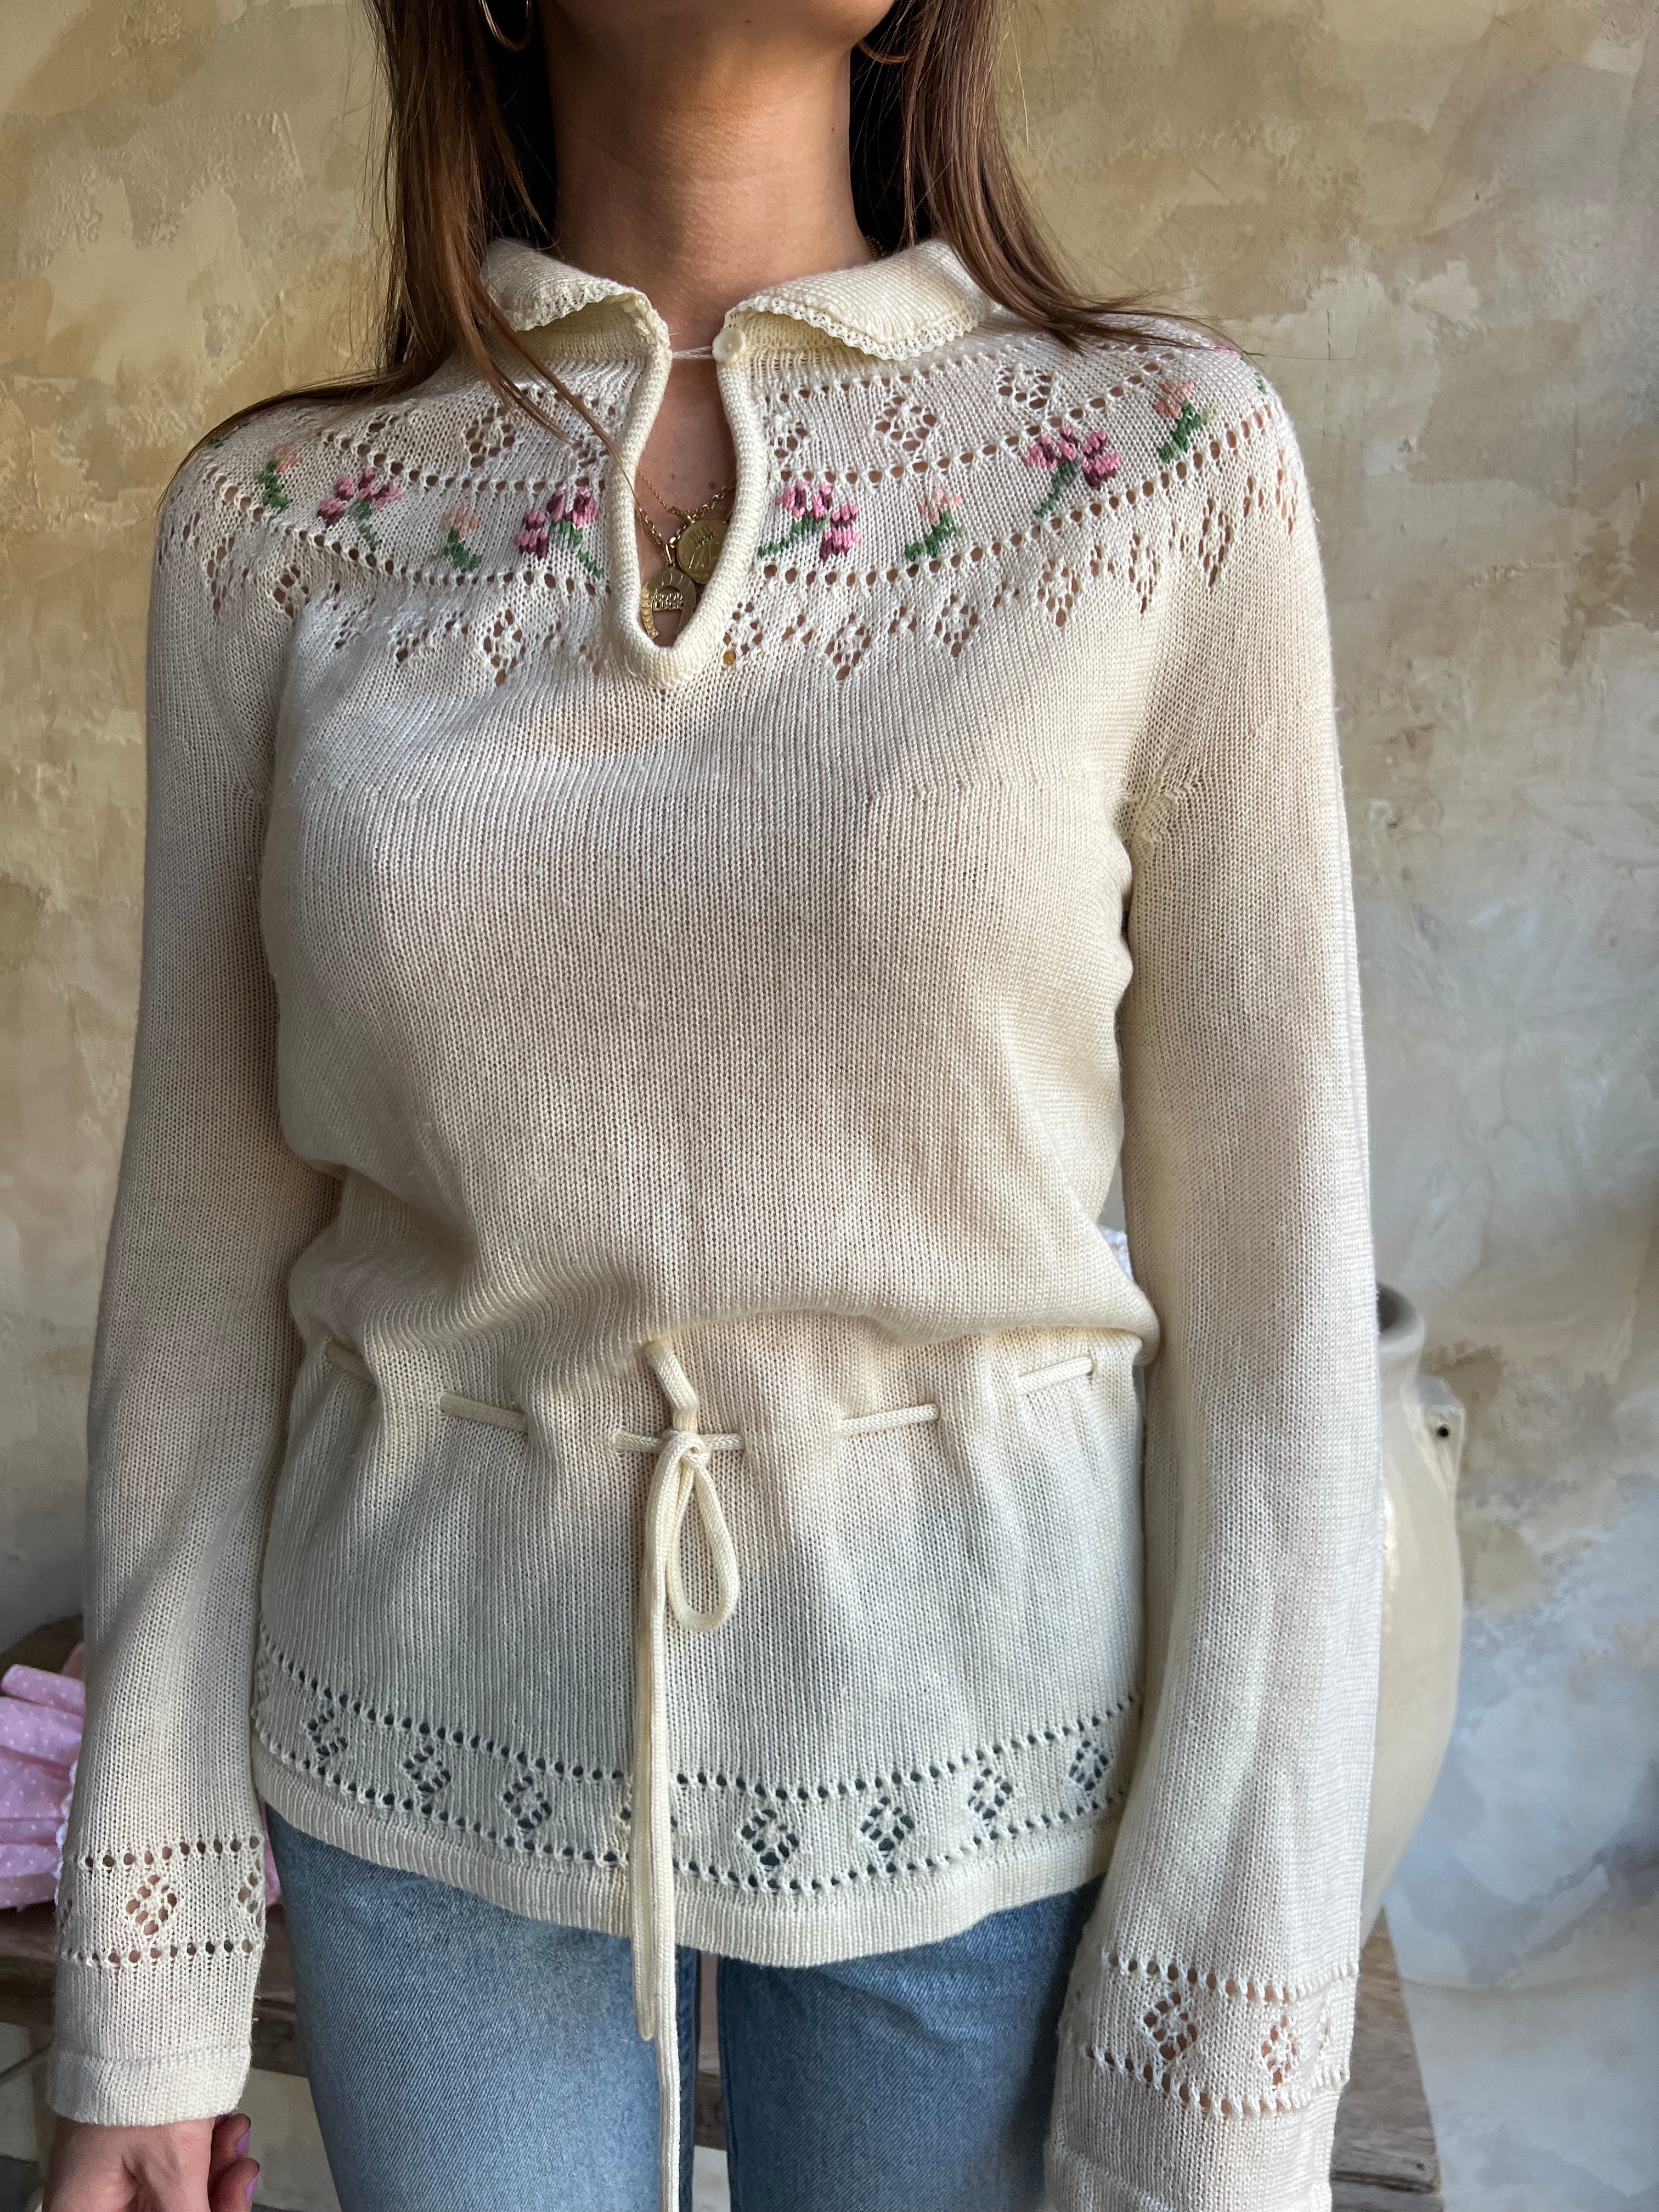 Floral Cream Knit Top